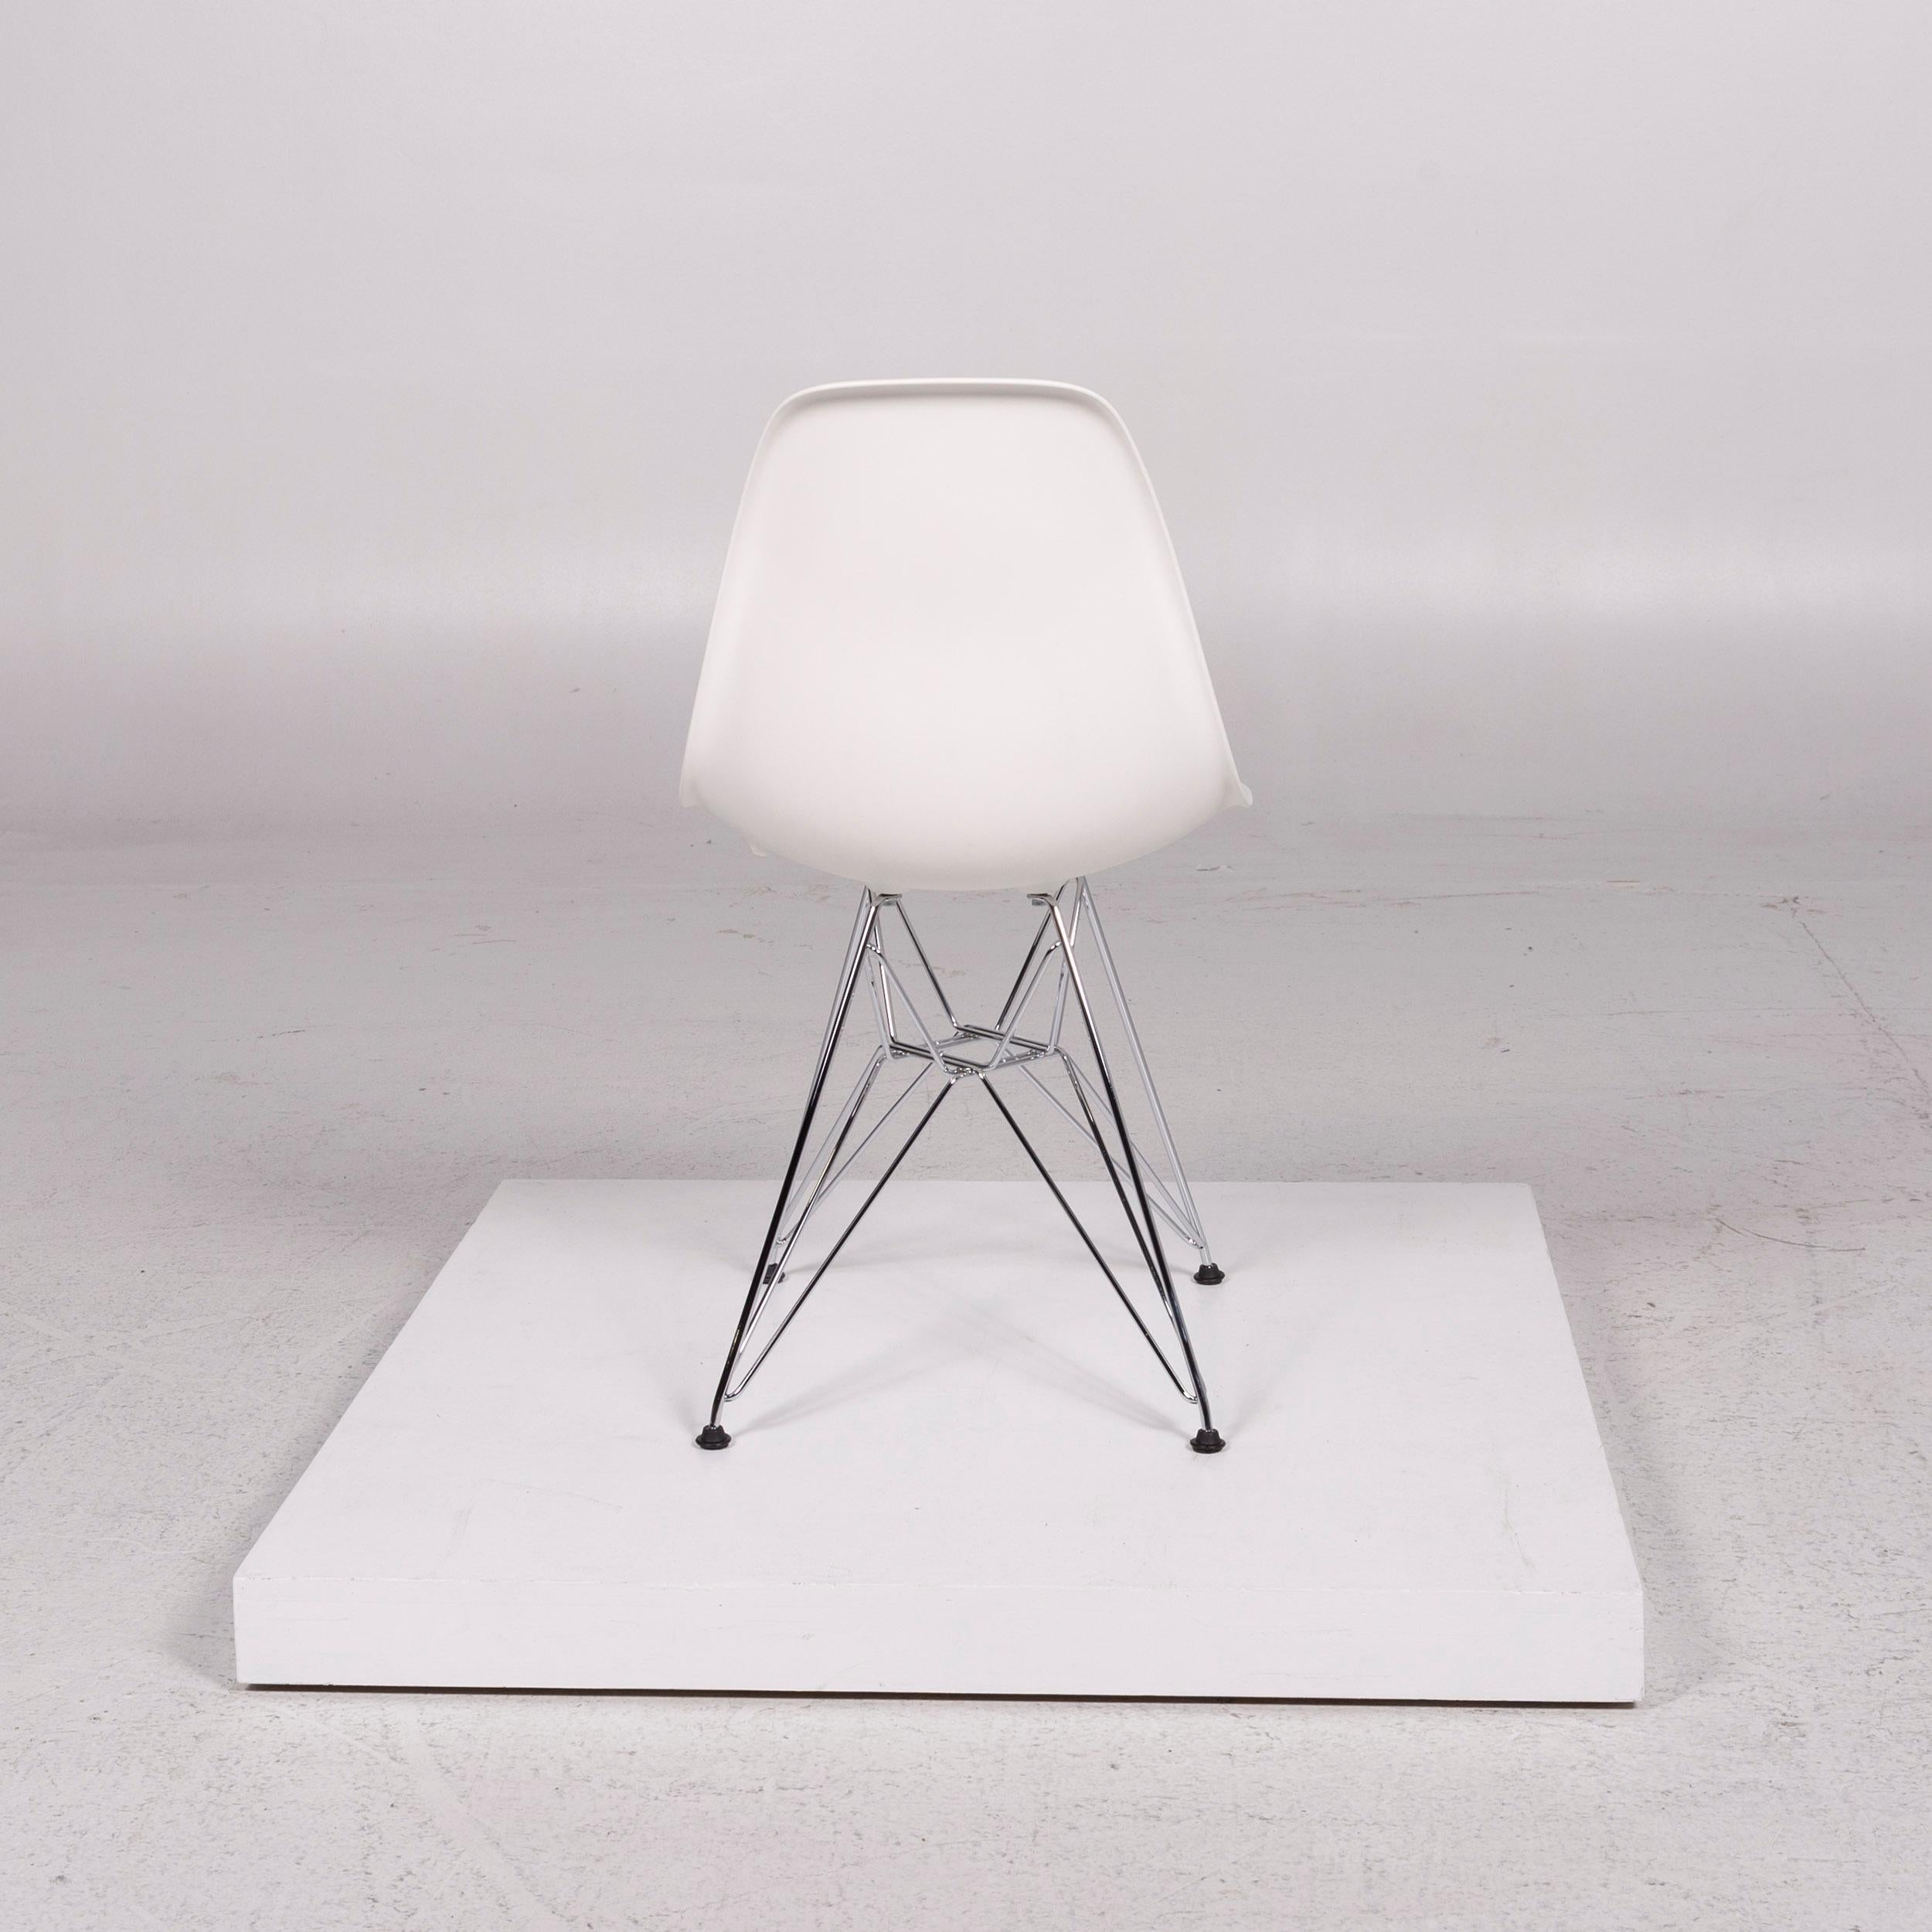 Contemporary Vitra Eames Plastic Side Chair DSR White Plastic Chair White incl. Upholstery